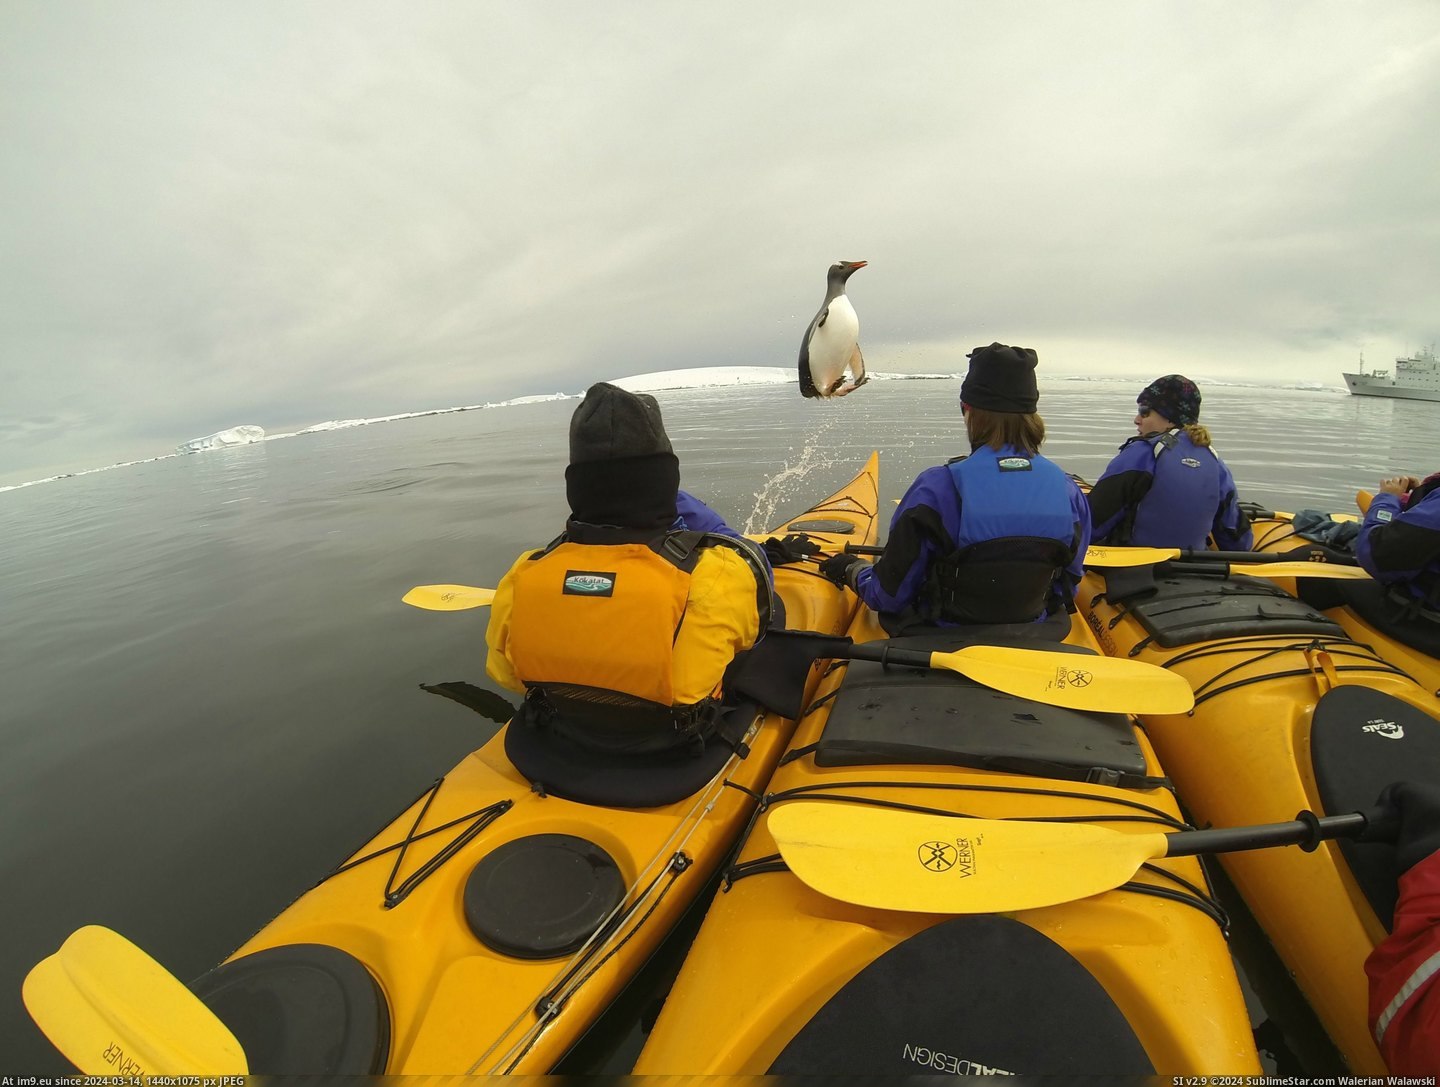 #One #Caught #Group #Antarctica #Kayakers #Trip #Jumping #Penguin [Pics] One of the Kayakers on my recent trip to Antarctica caught a penguin jumping into their group. Pic. (Image of album My r/PICS favs))